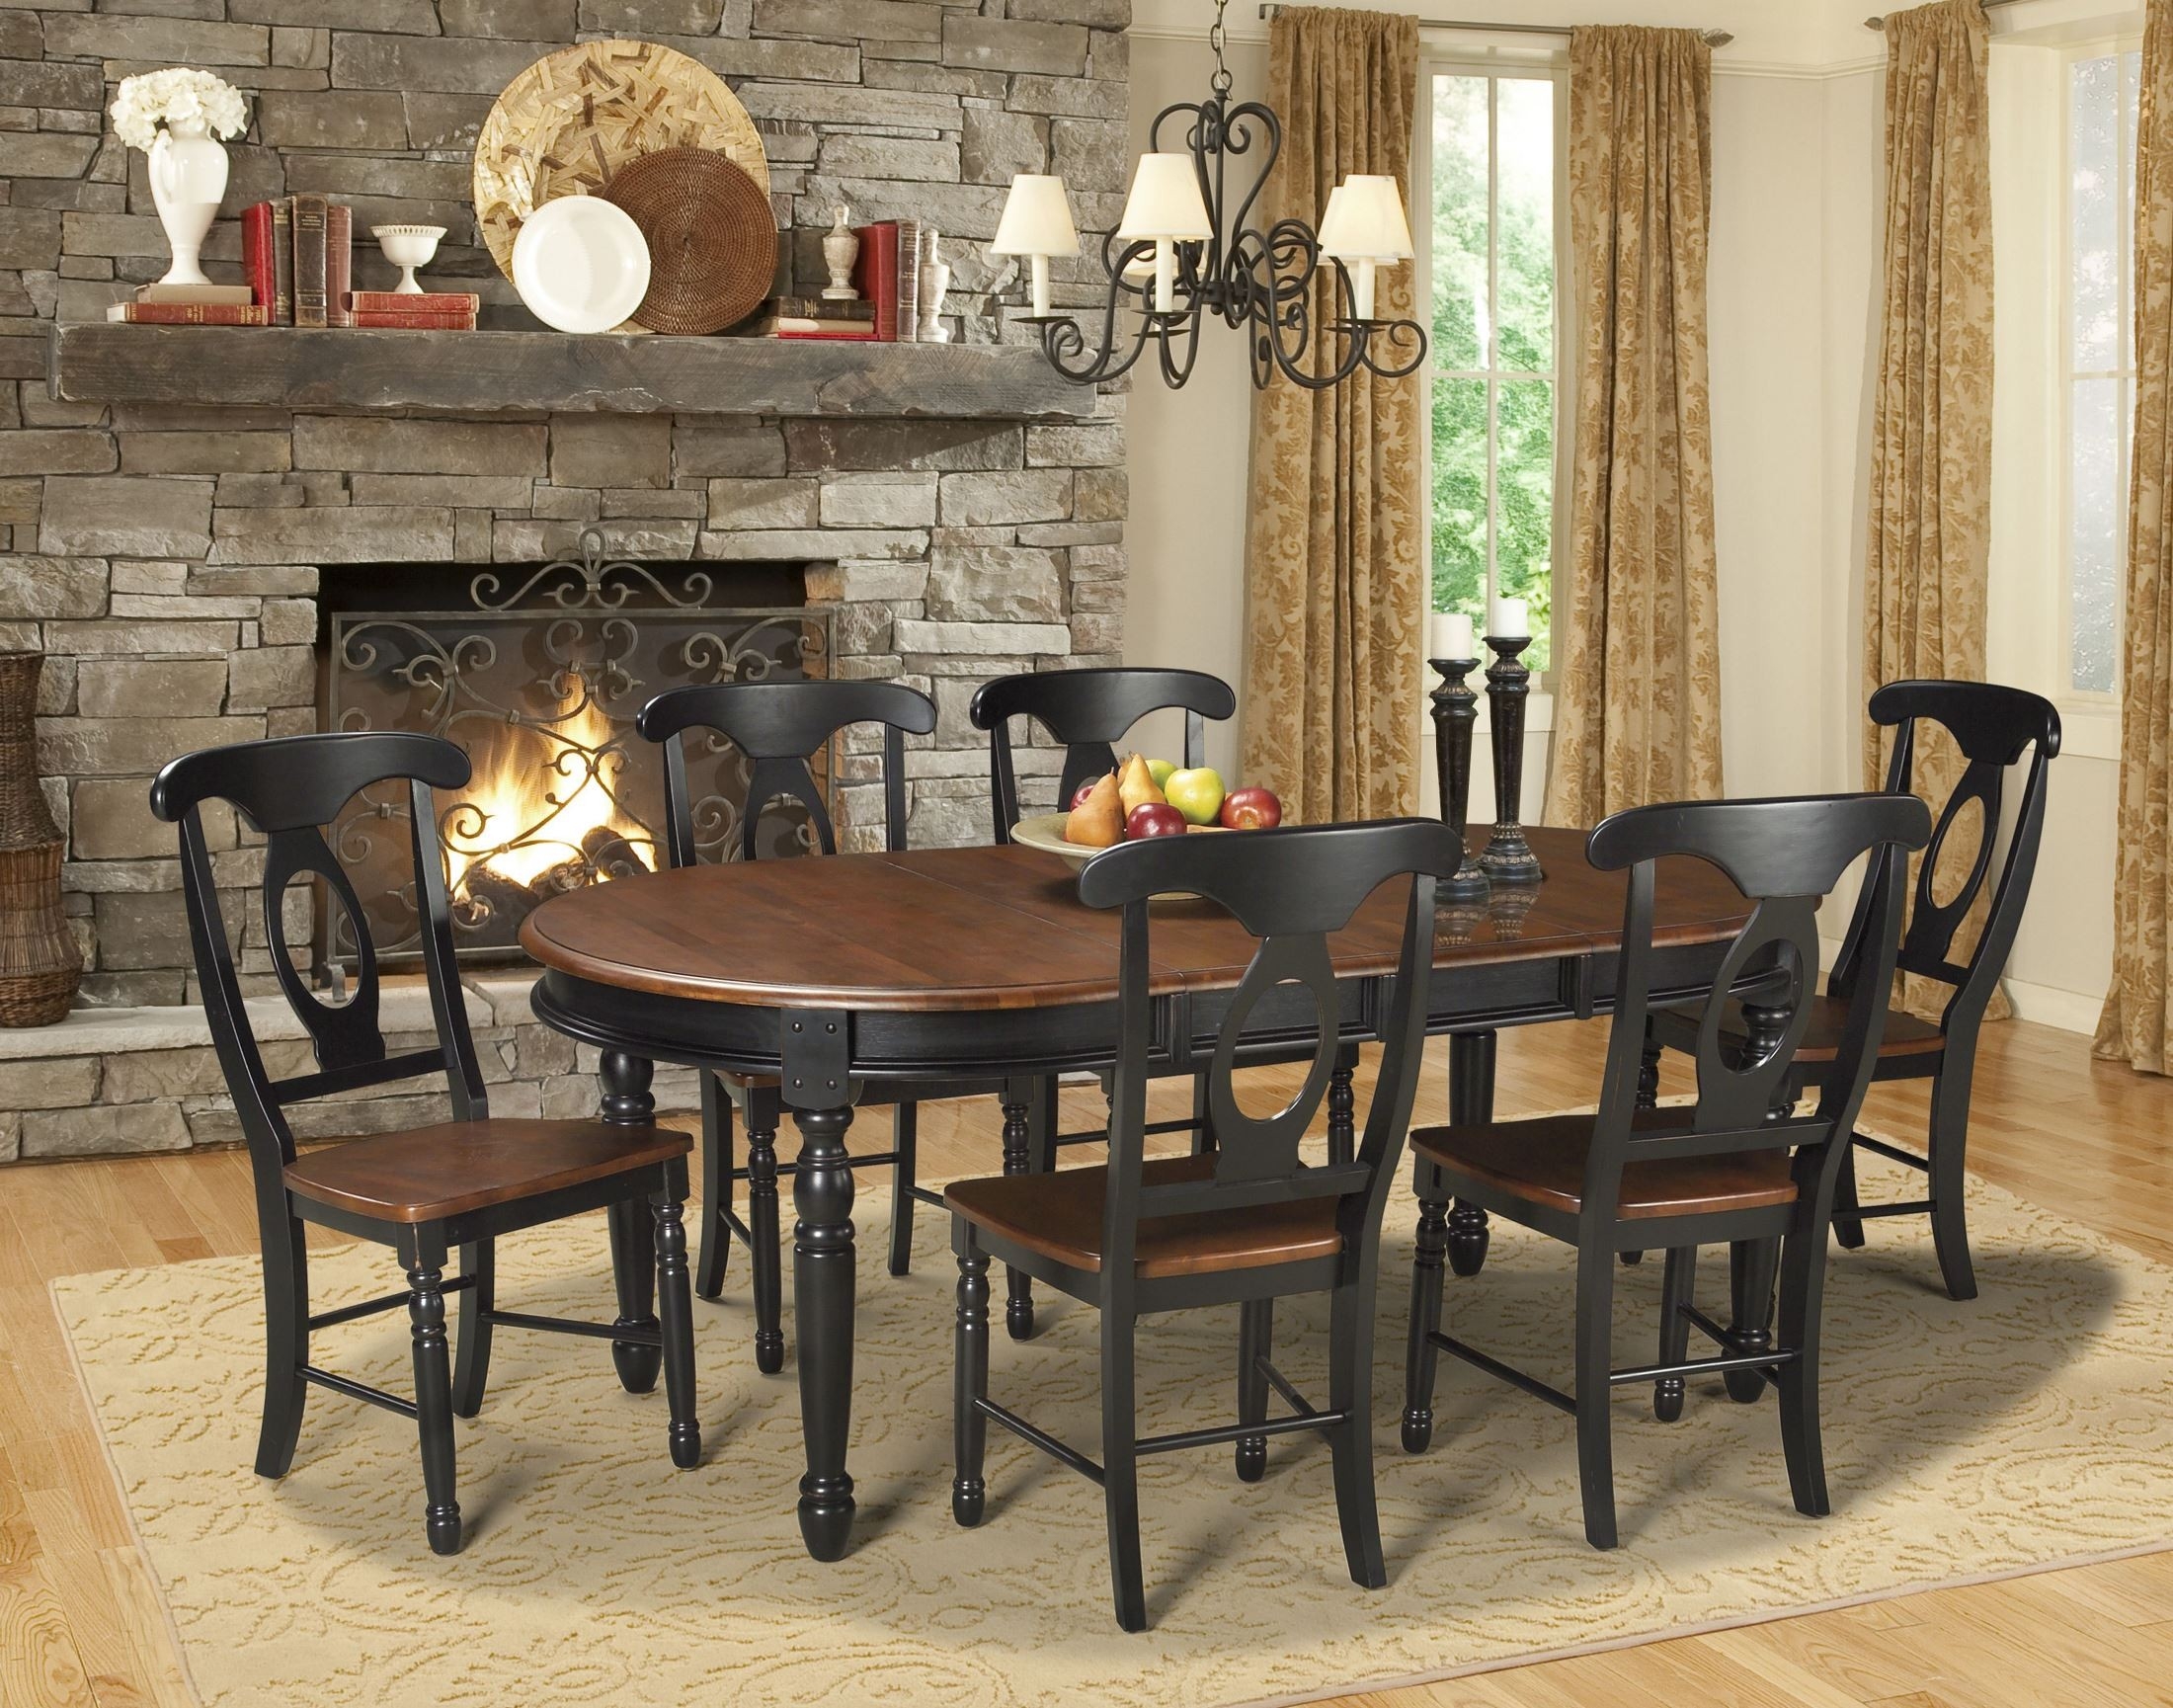 Oval dining table for 6 13